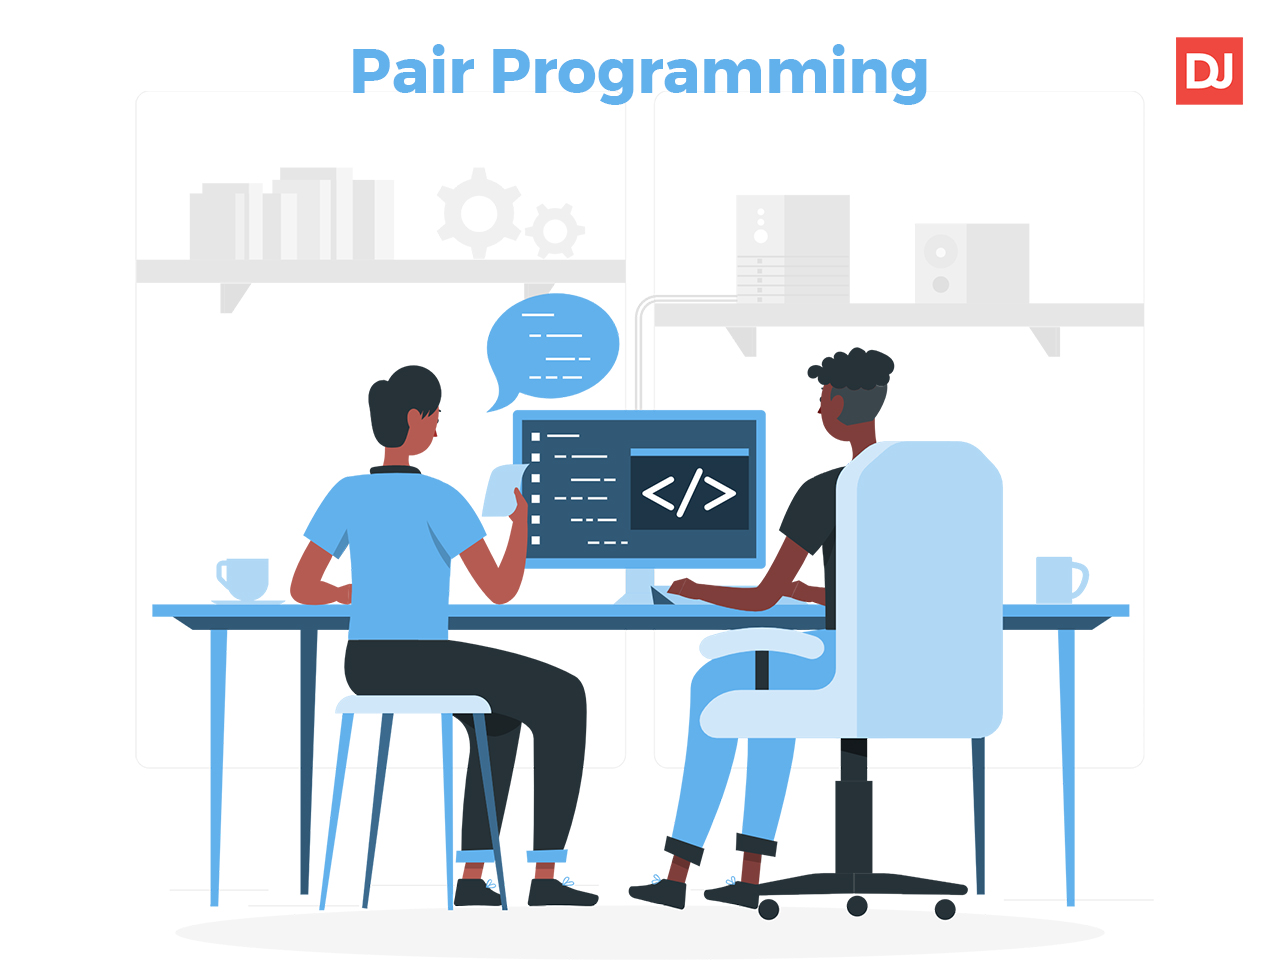 13th-Aug-DJ-Banner-Pair-Programming-Why-You-Should-Care-About-It-and-How-To-Do-It-Remotely.jpg